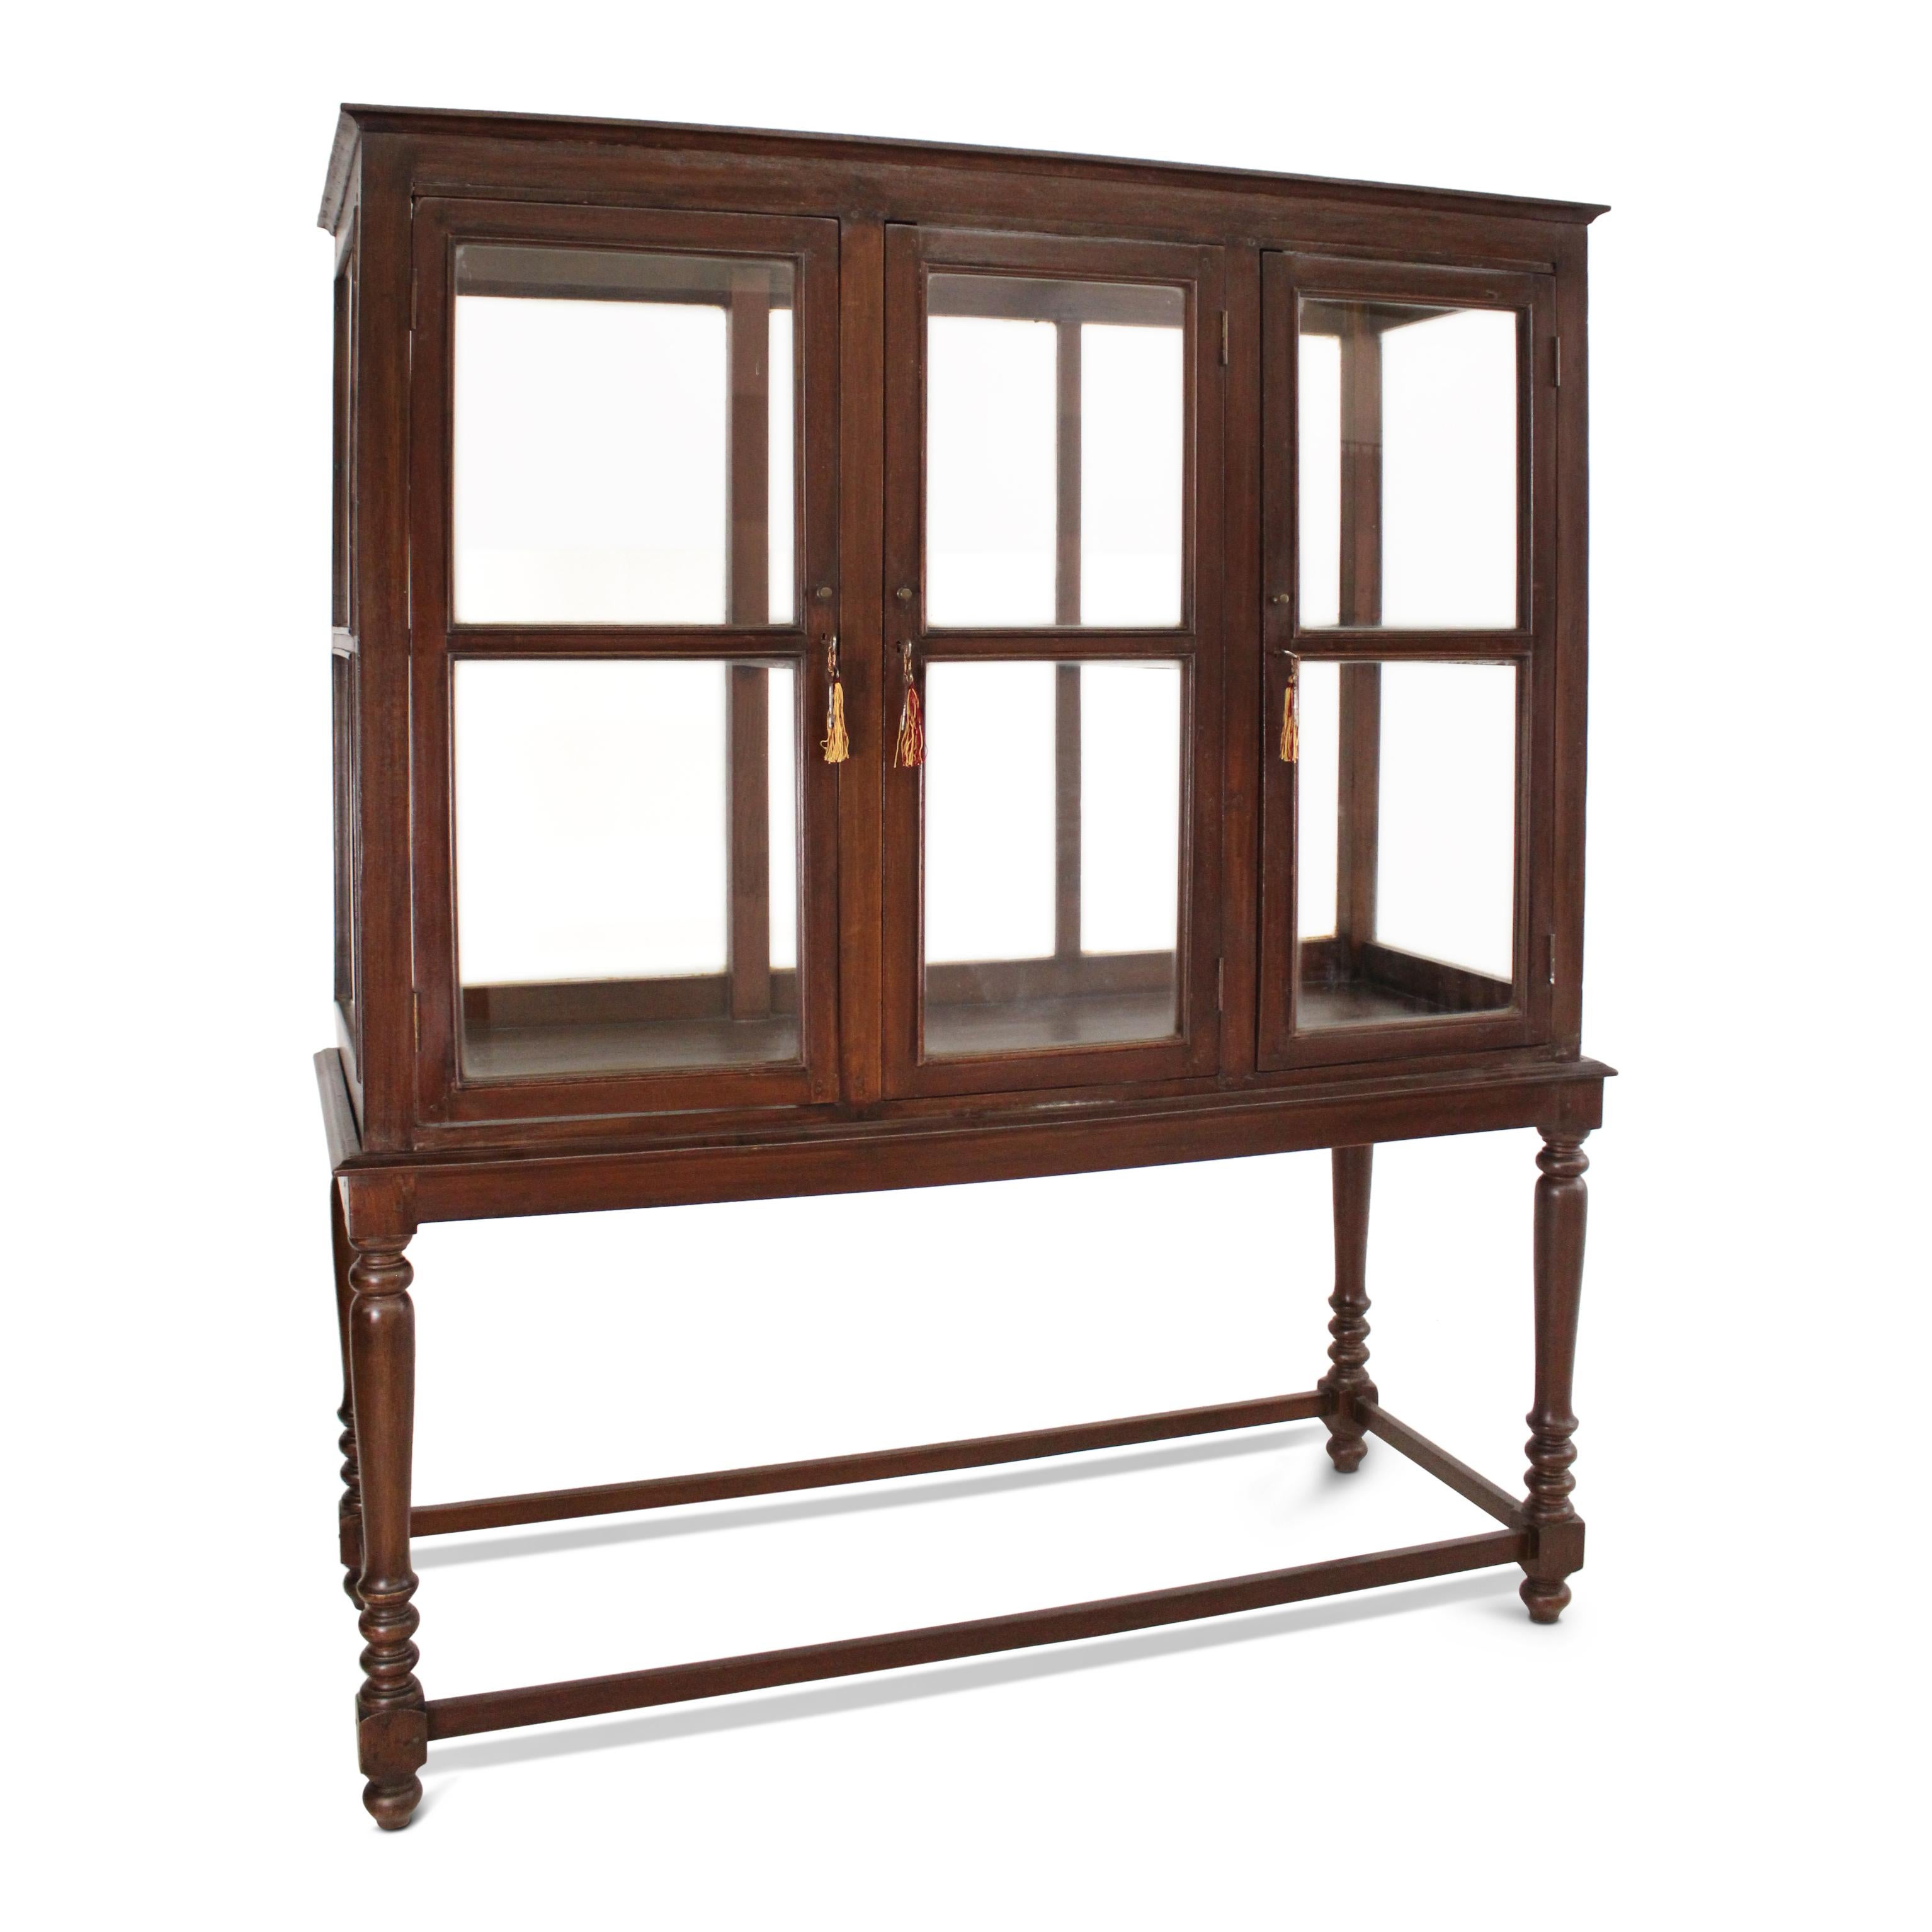 A teak museum vitrine cabinet, in excellent condition. This generously sized cabinet features glass panels on all sides, three front doors, and glass shelving inside.